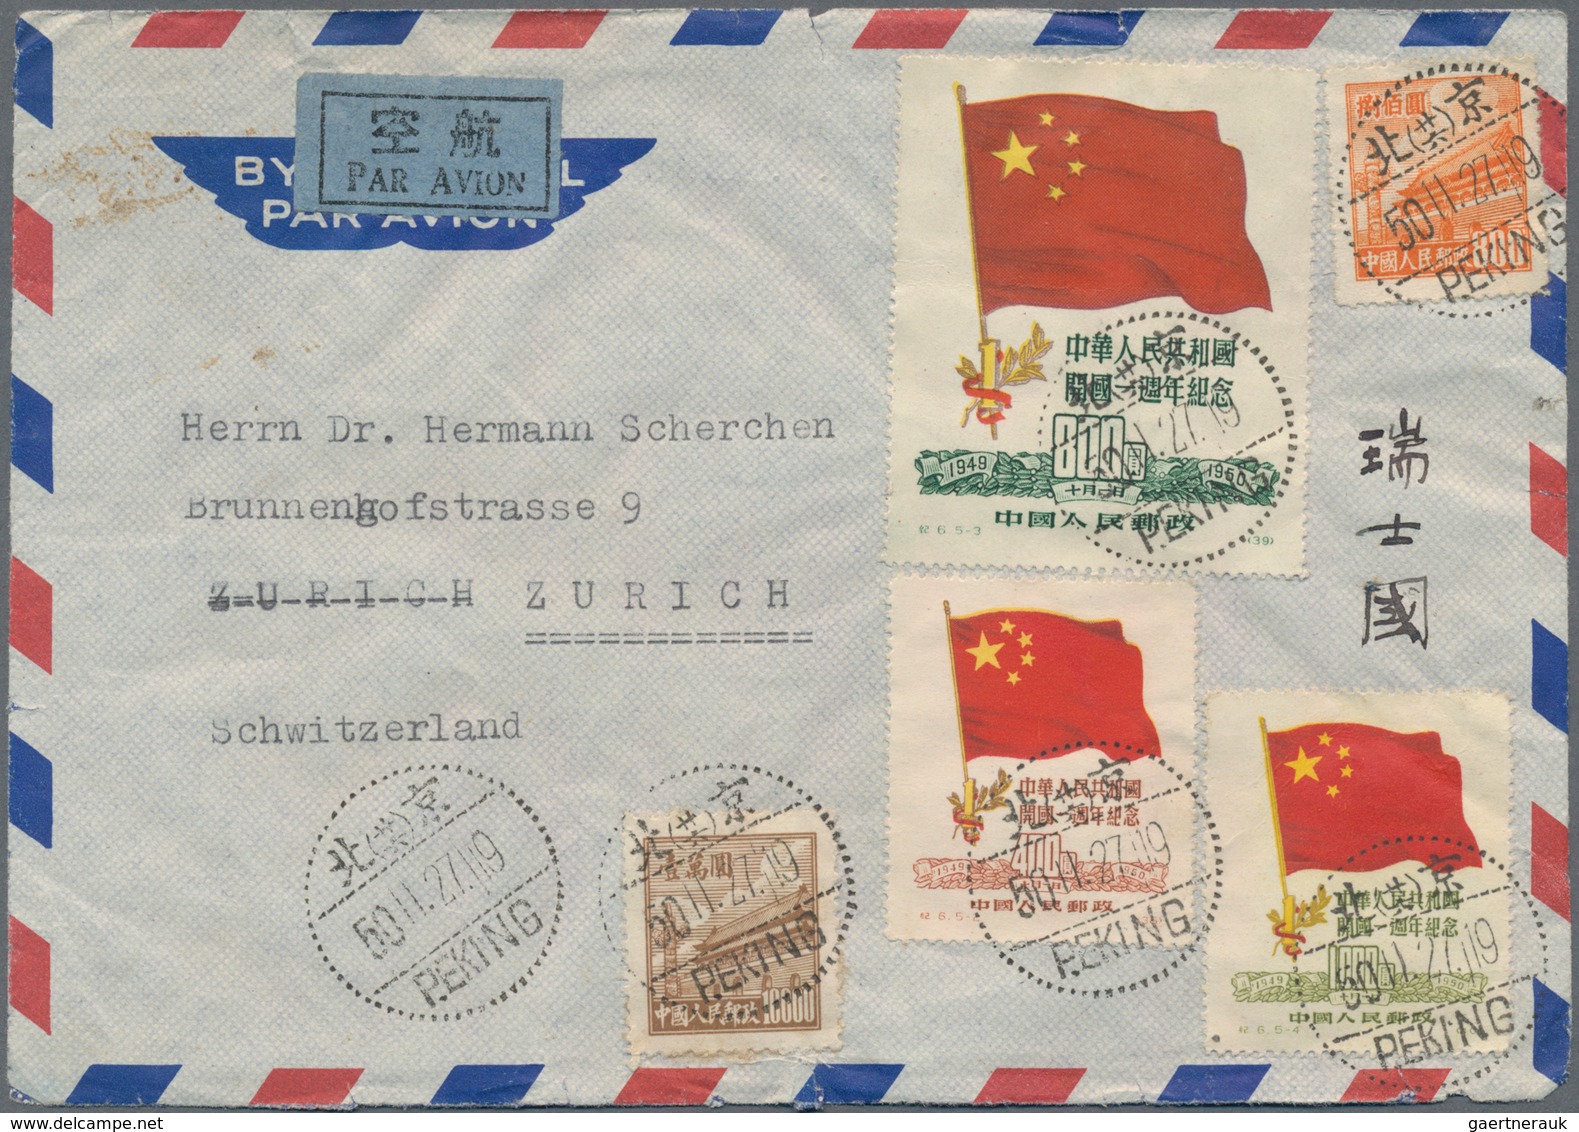 China - Volksrepublik: 1950, 1st Anniversary (C6) $400, $800 And $1000 With Tien An Men $800, $10.00 - Lettres & Documents